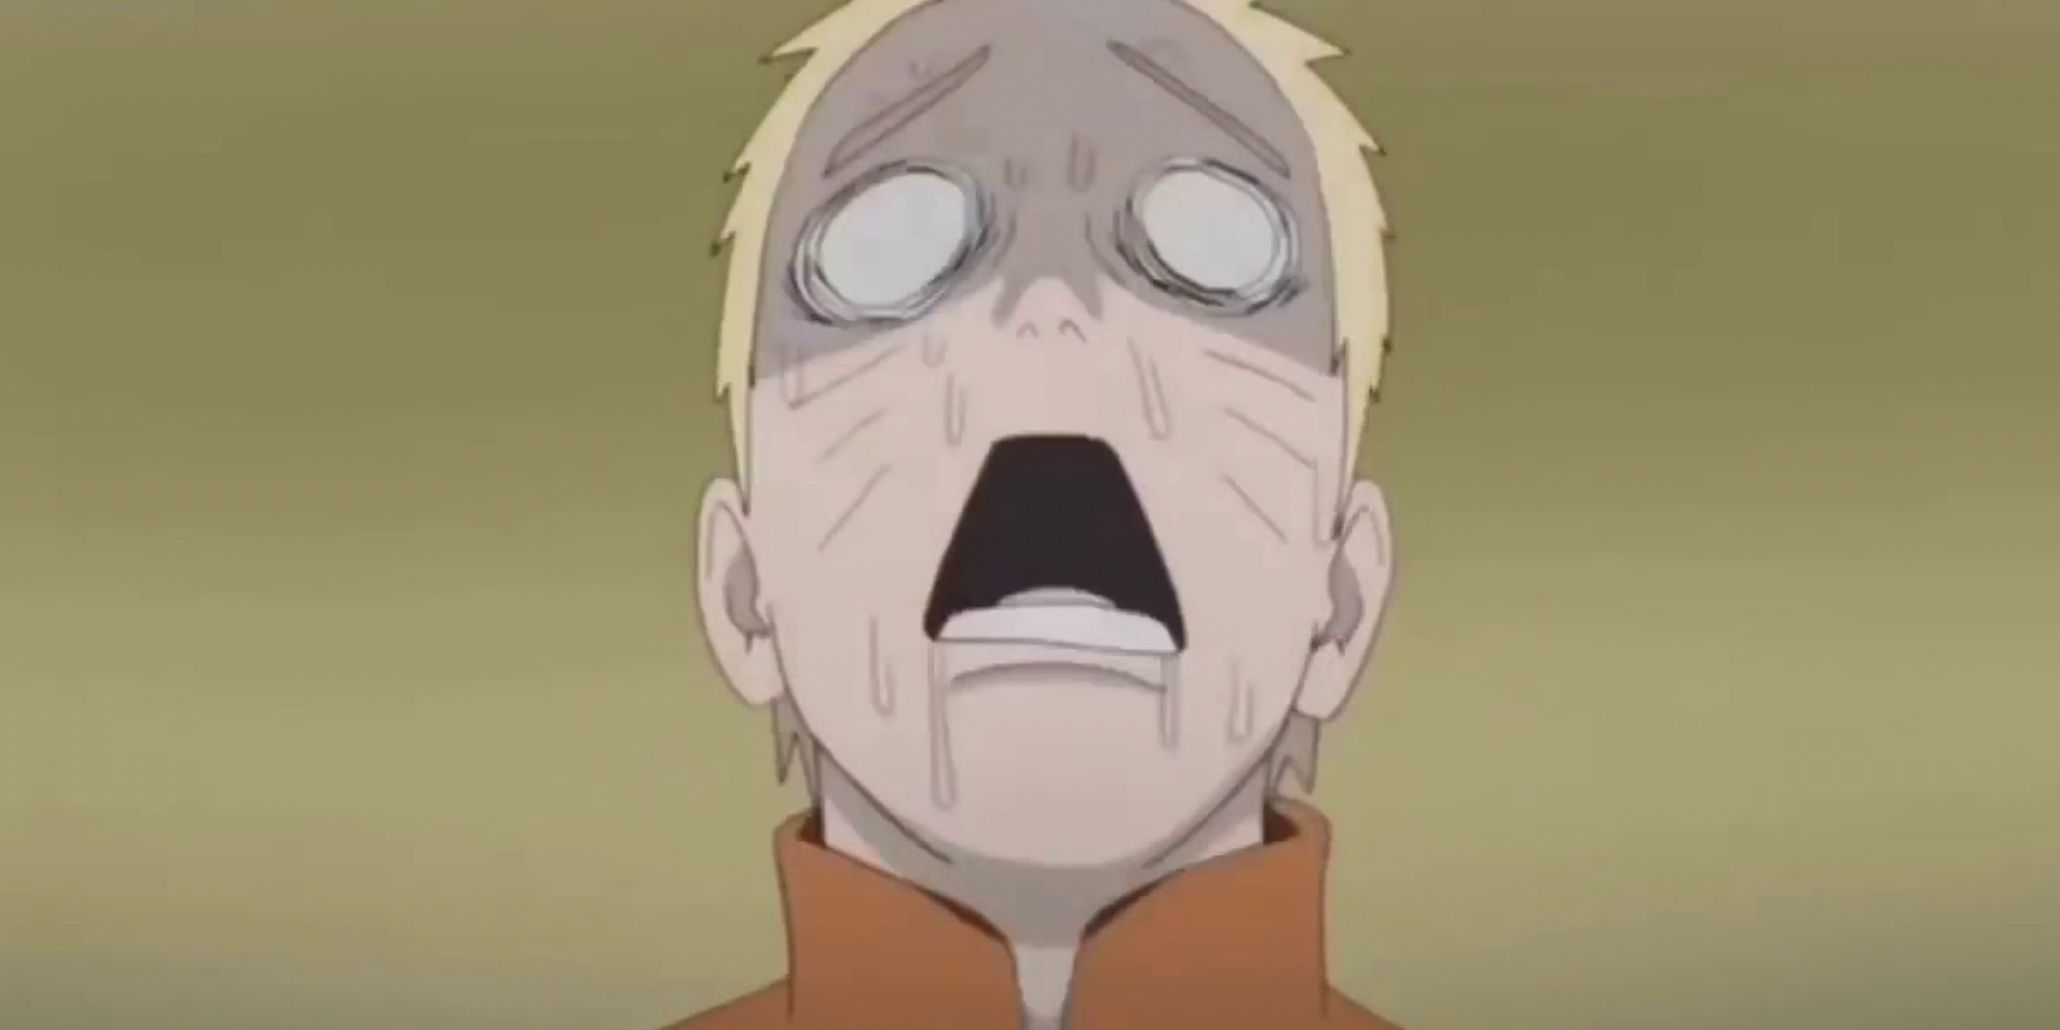 Naruto is out cold in Boruto